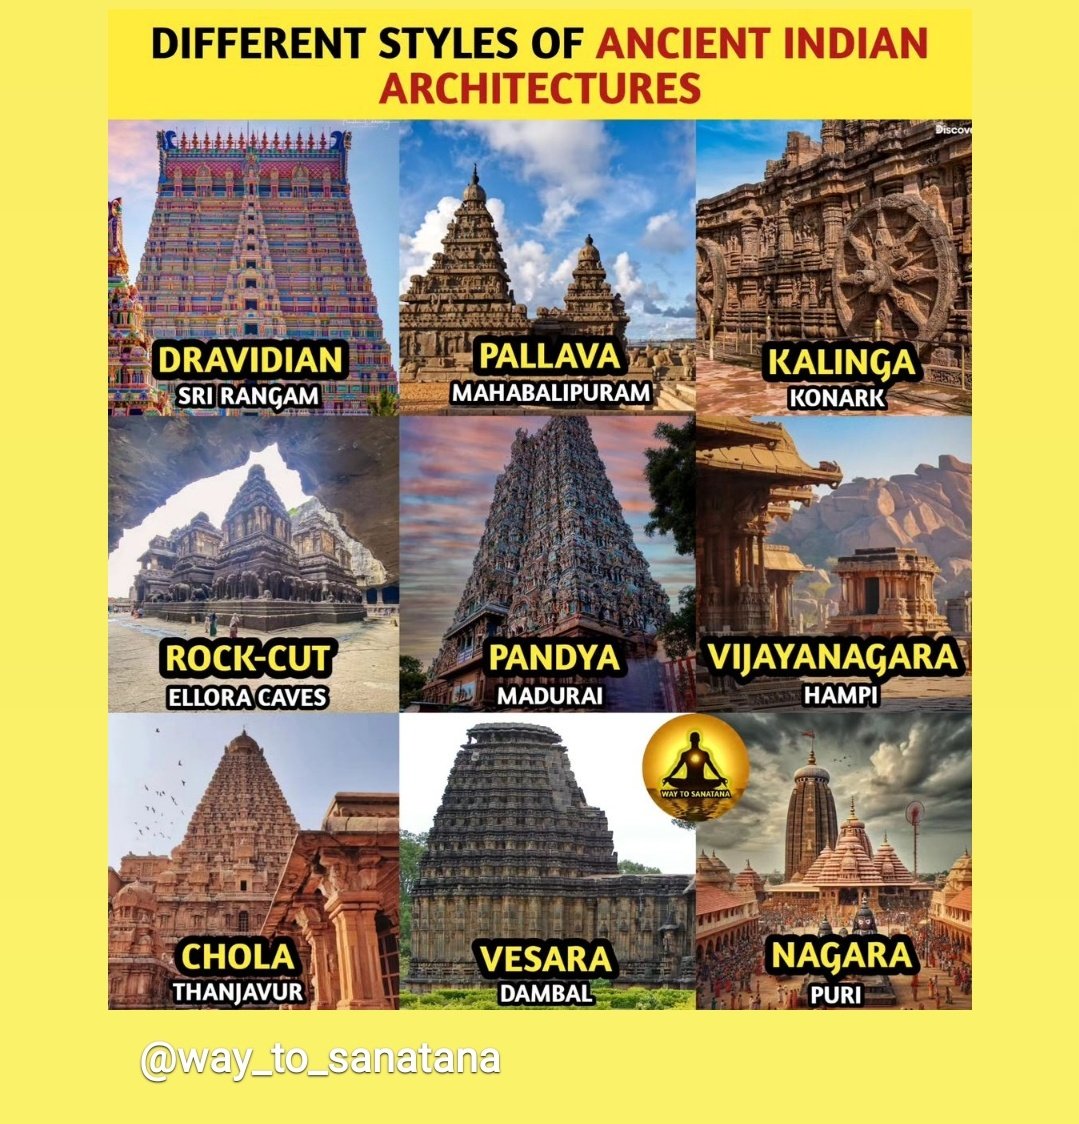 Our ancient architectures 🚩

#Bharat #Temples
#HinduRashtra